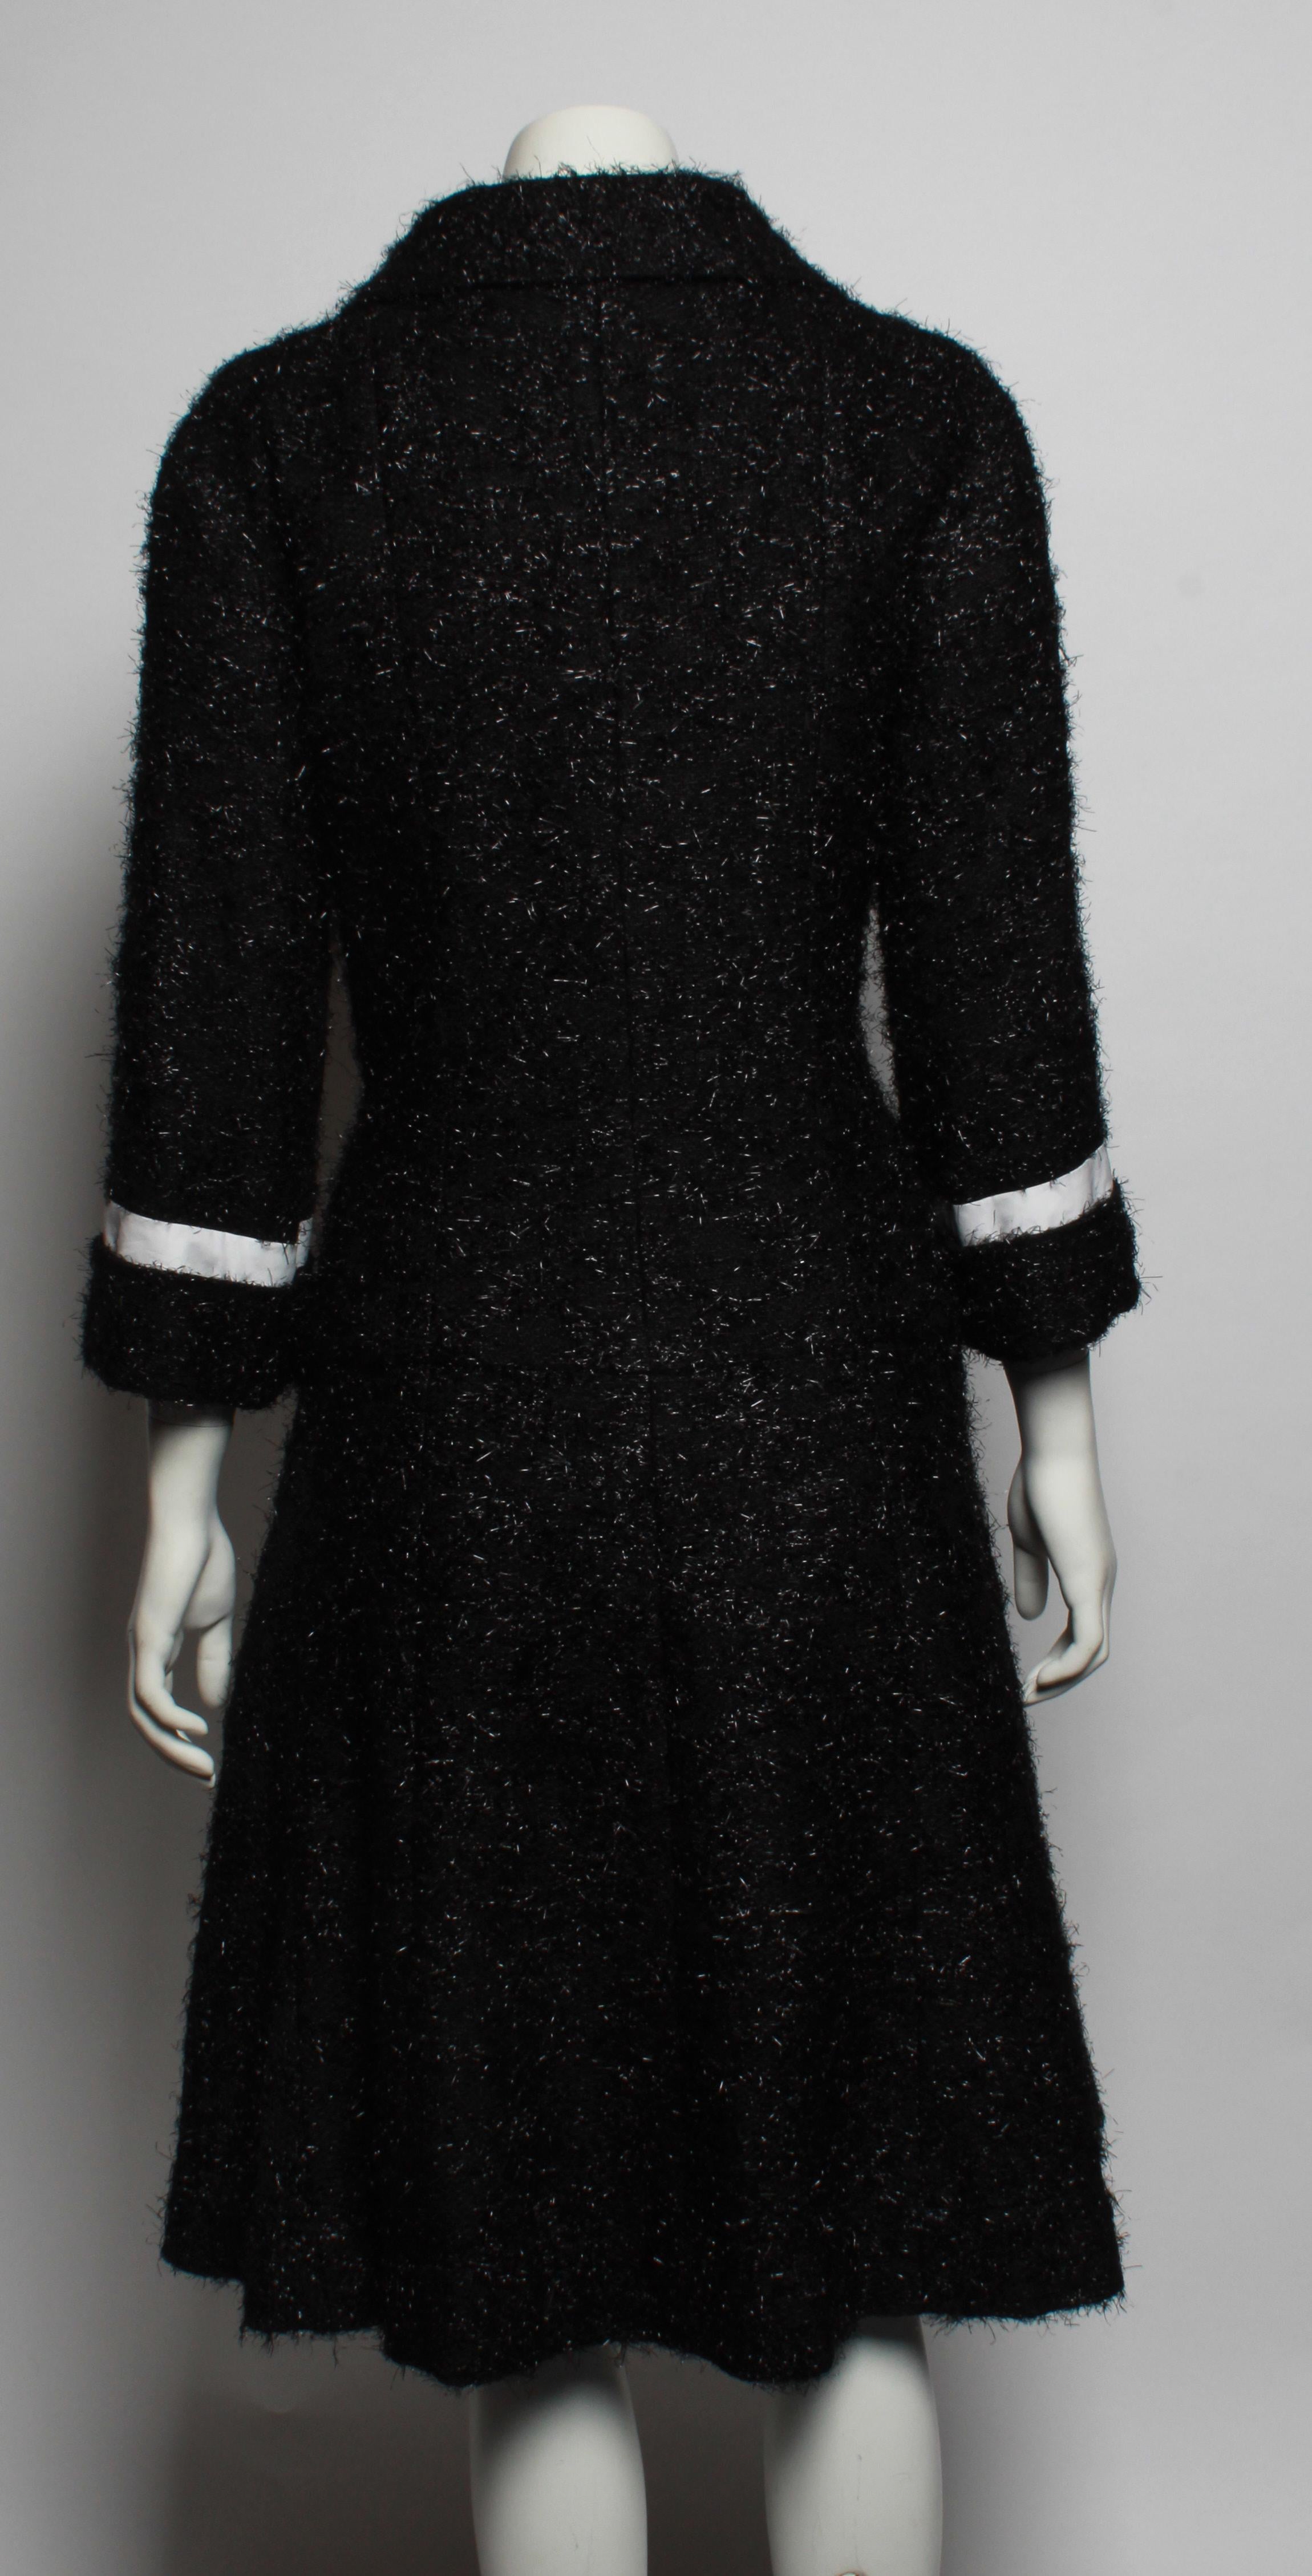 Chanel 2013 Collection Two Piece Coat and Skirt Ensemble In Excellent Condition For Sale In Melbourne, Victoria